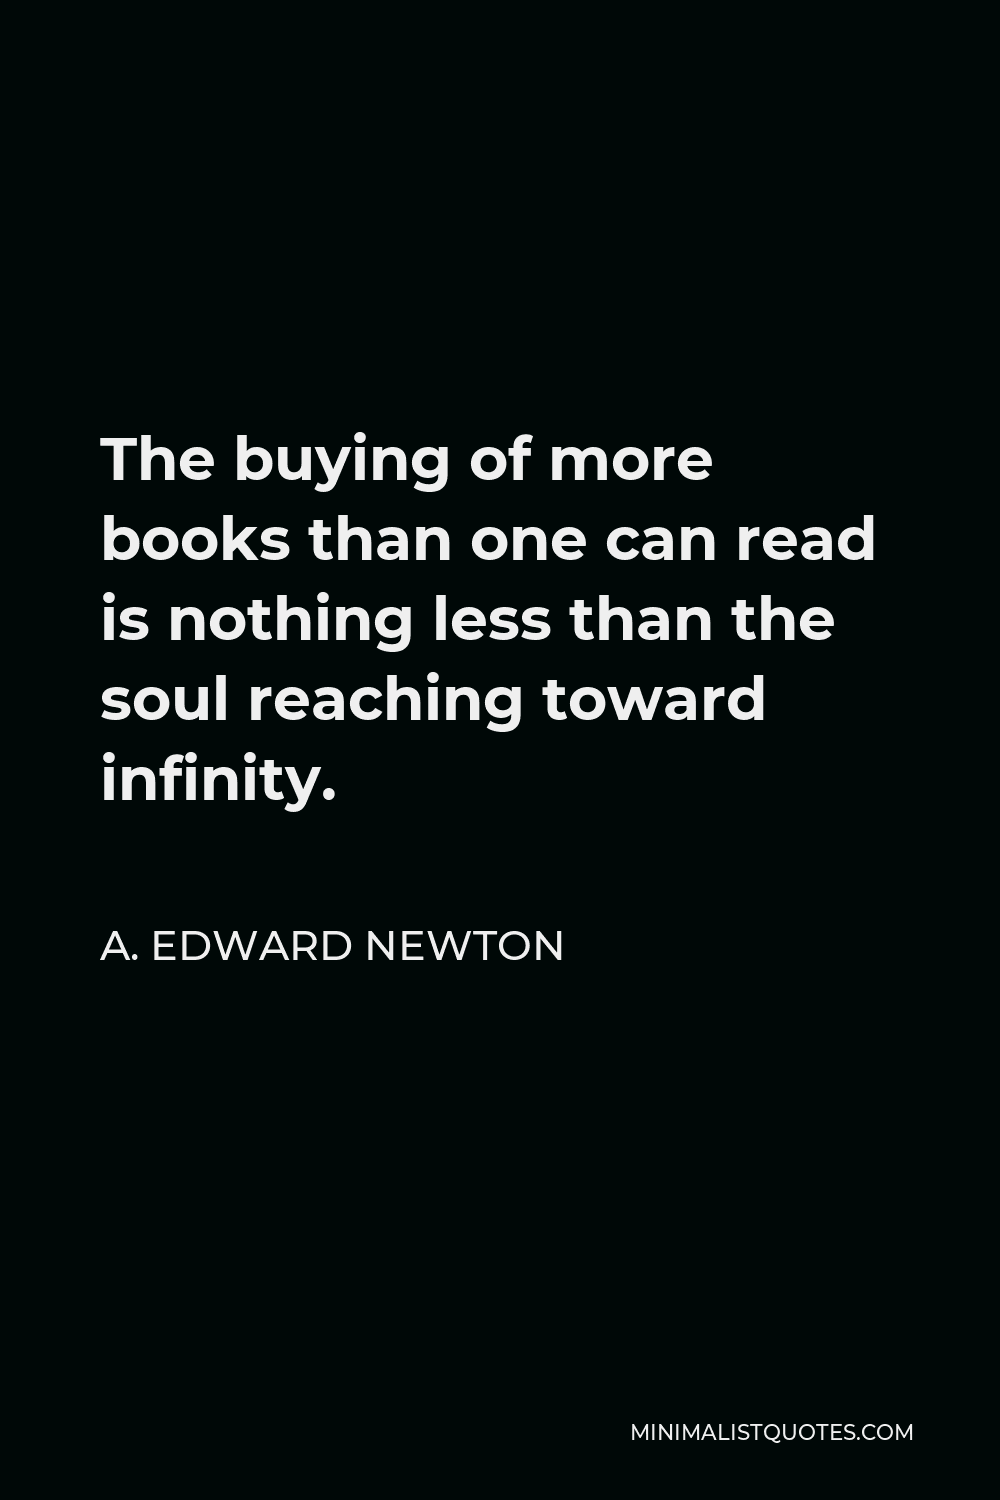 A. Edward Newton Quote - The buying of more books than one can read is nothing less than the soul reaching toward infinity.